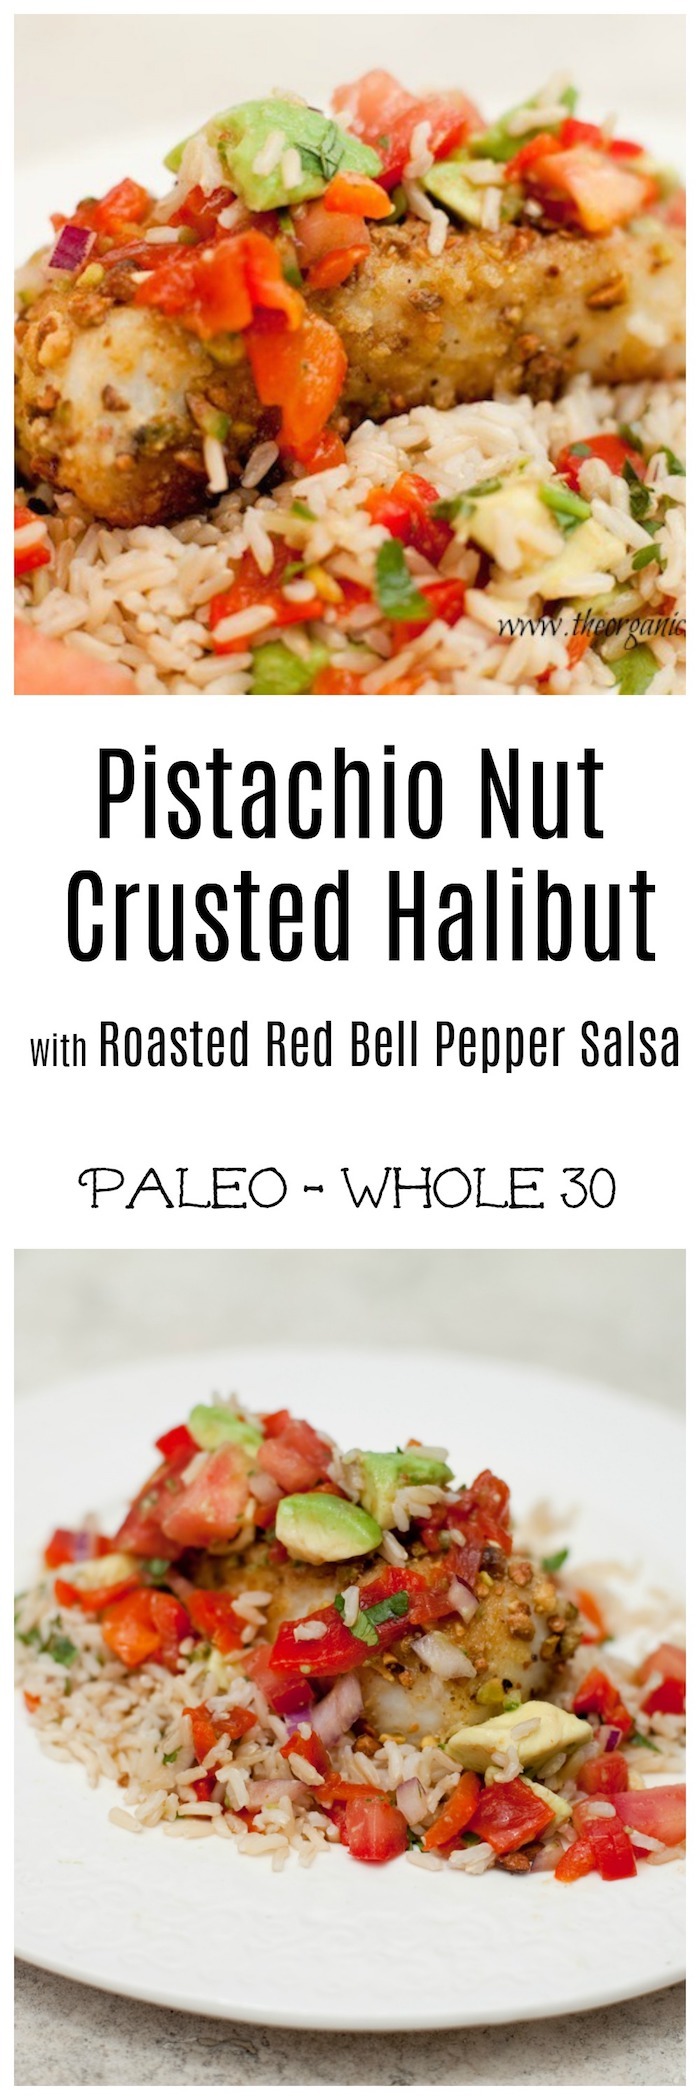 Pistachio Nut Crusted Halibut with Roasted Red Pepper Salsa